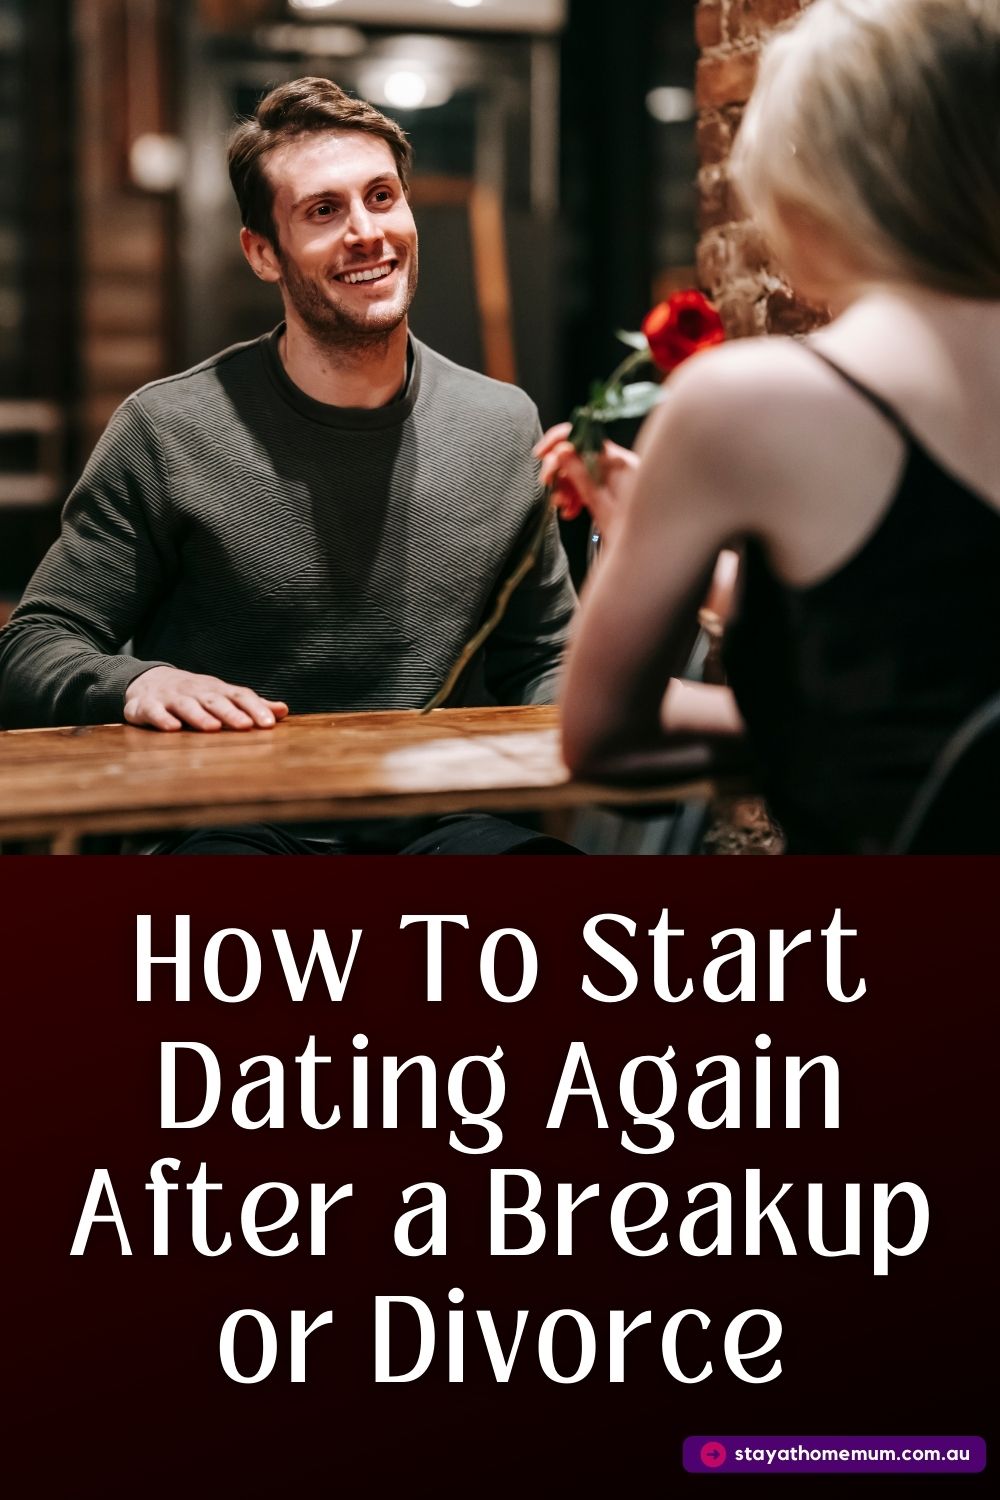 How To Start Dating Again After a Breakup or Divorce Pinnable